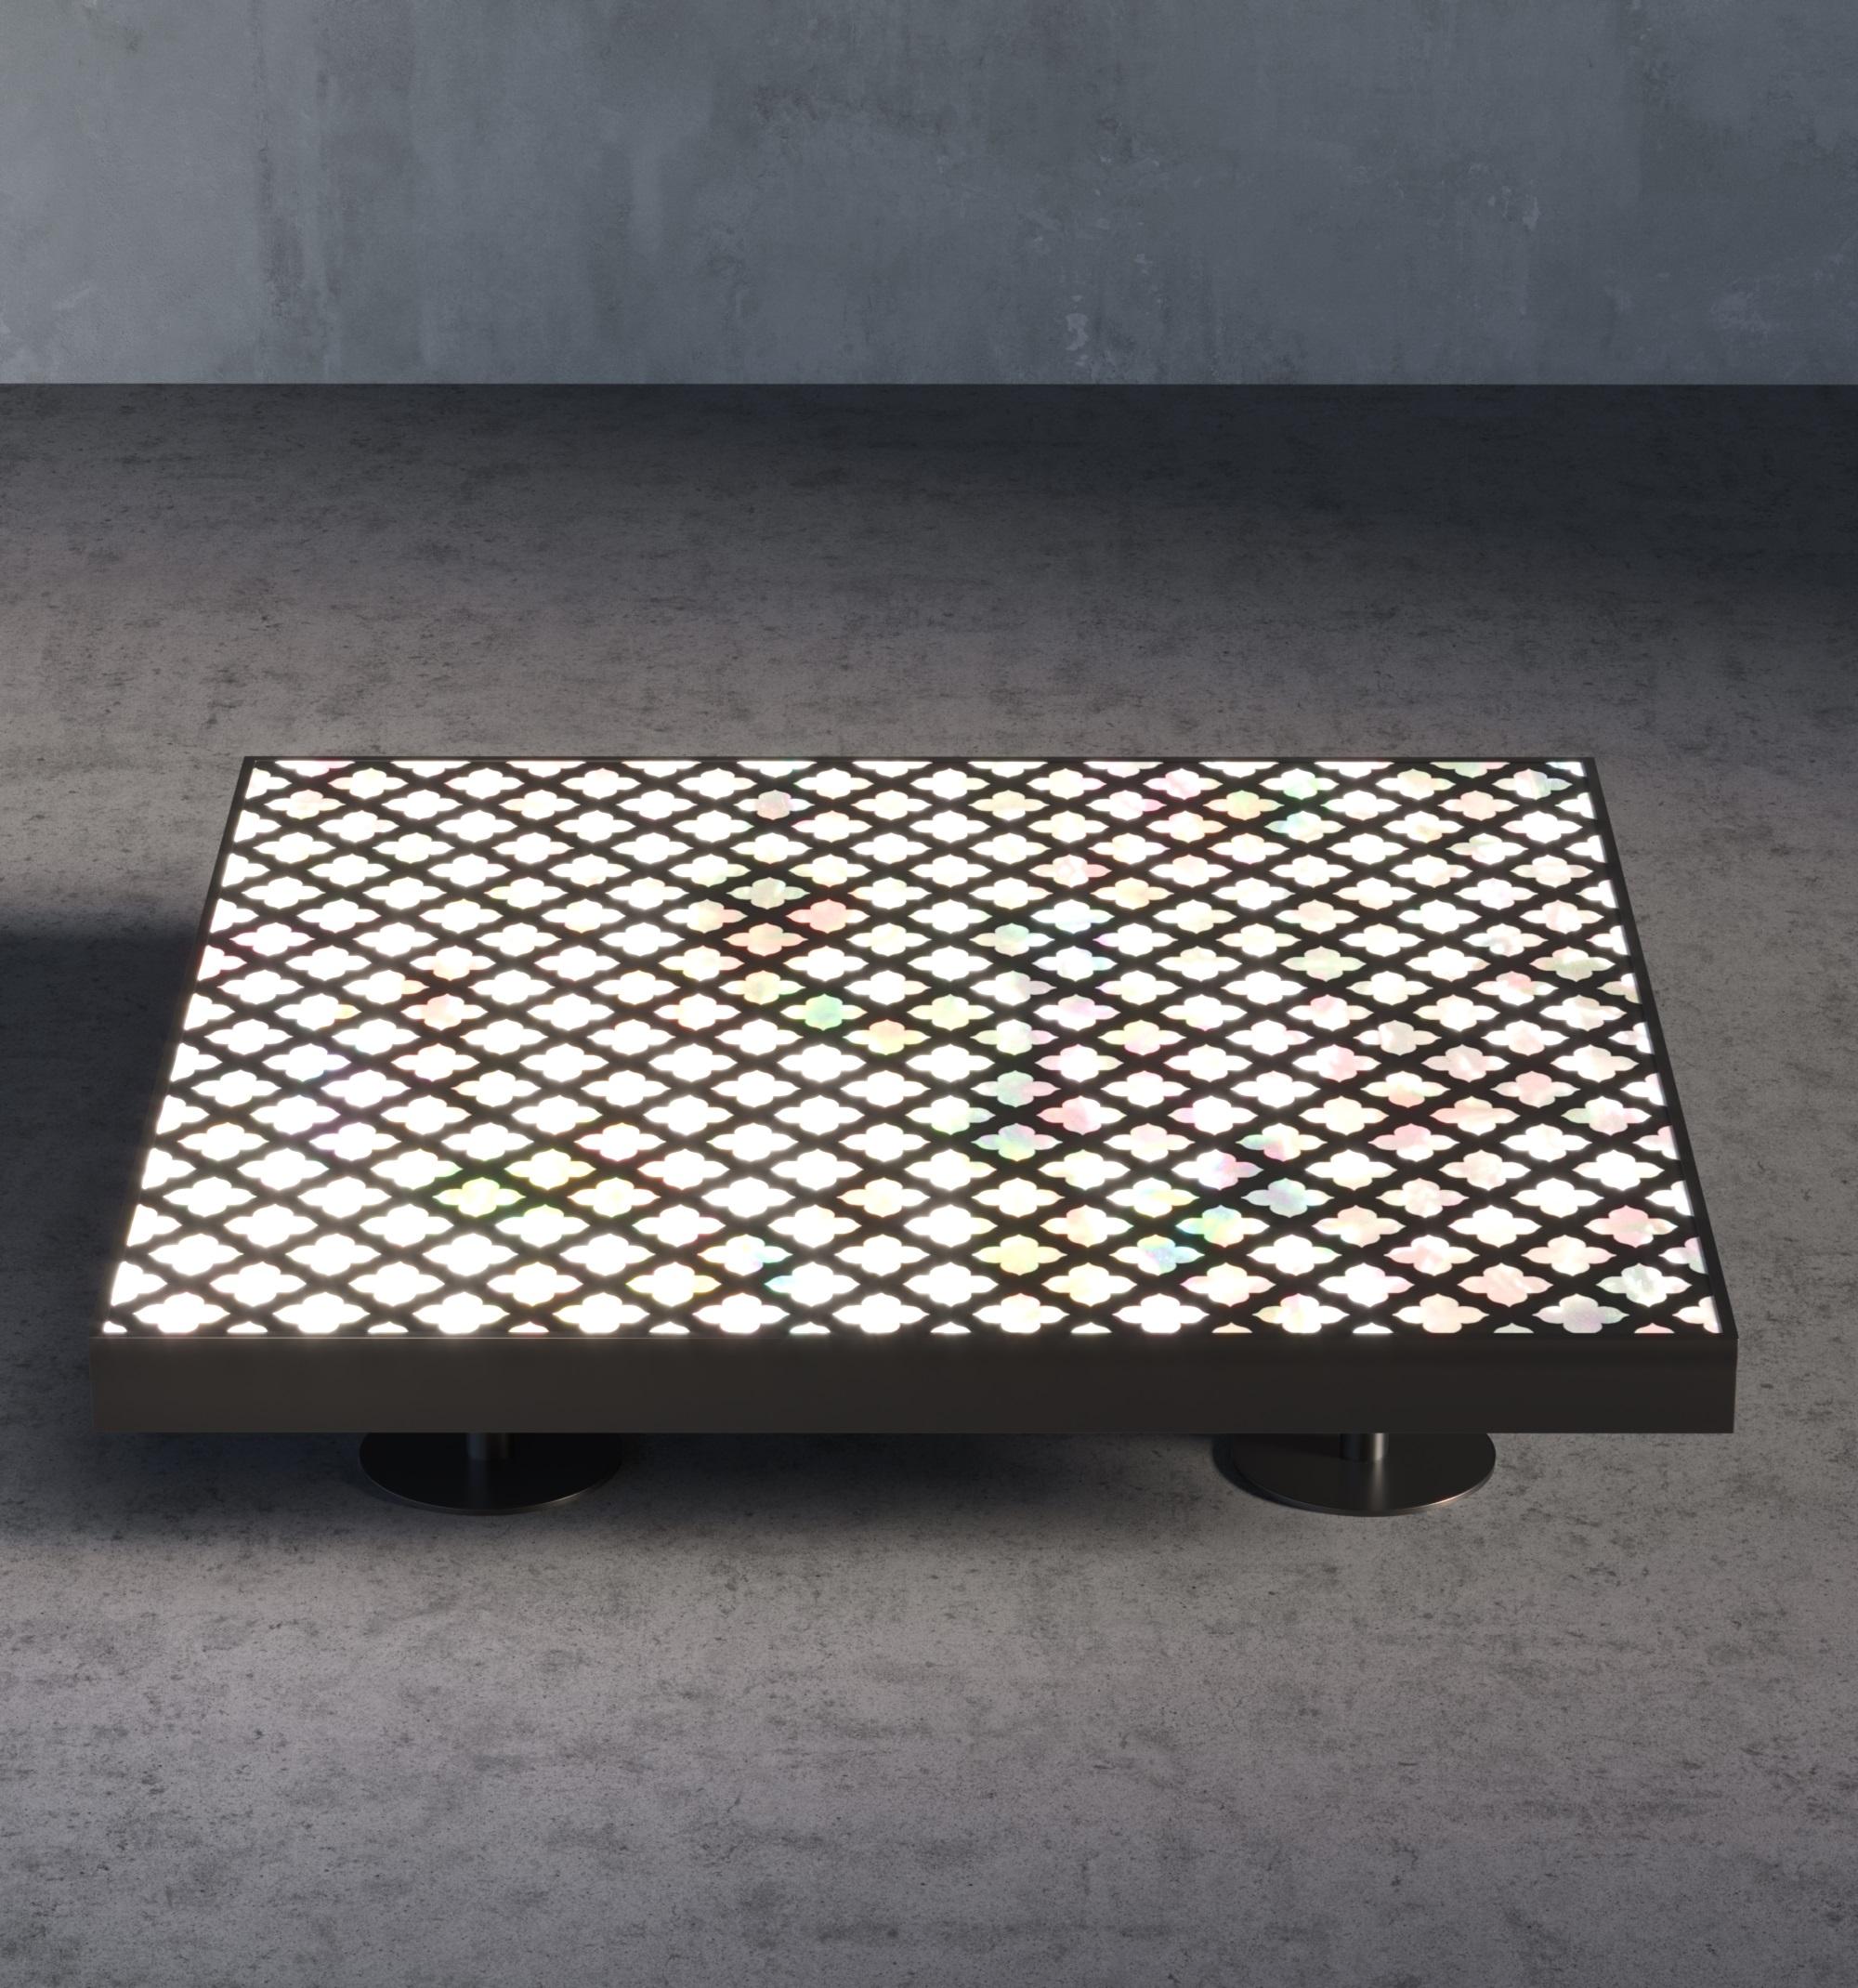 Alhambra Center Table features mother of pearl furniture where small pieces of the shell are cut into delicate shapes and arranged in intricate patterns. 

The Alhambra Center Table can be replaced with other stone options including tiger eye, Lapis